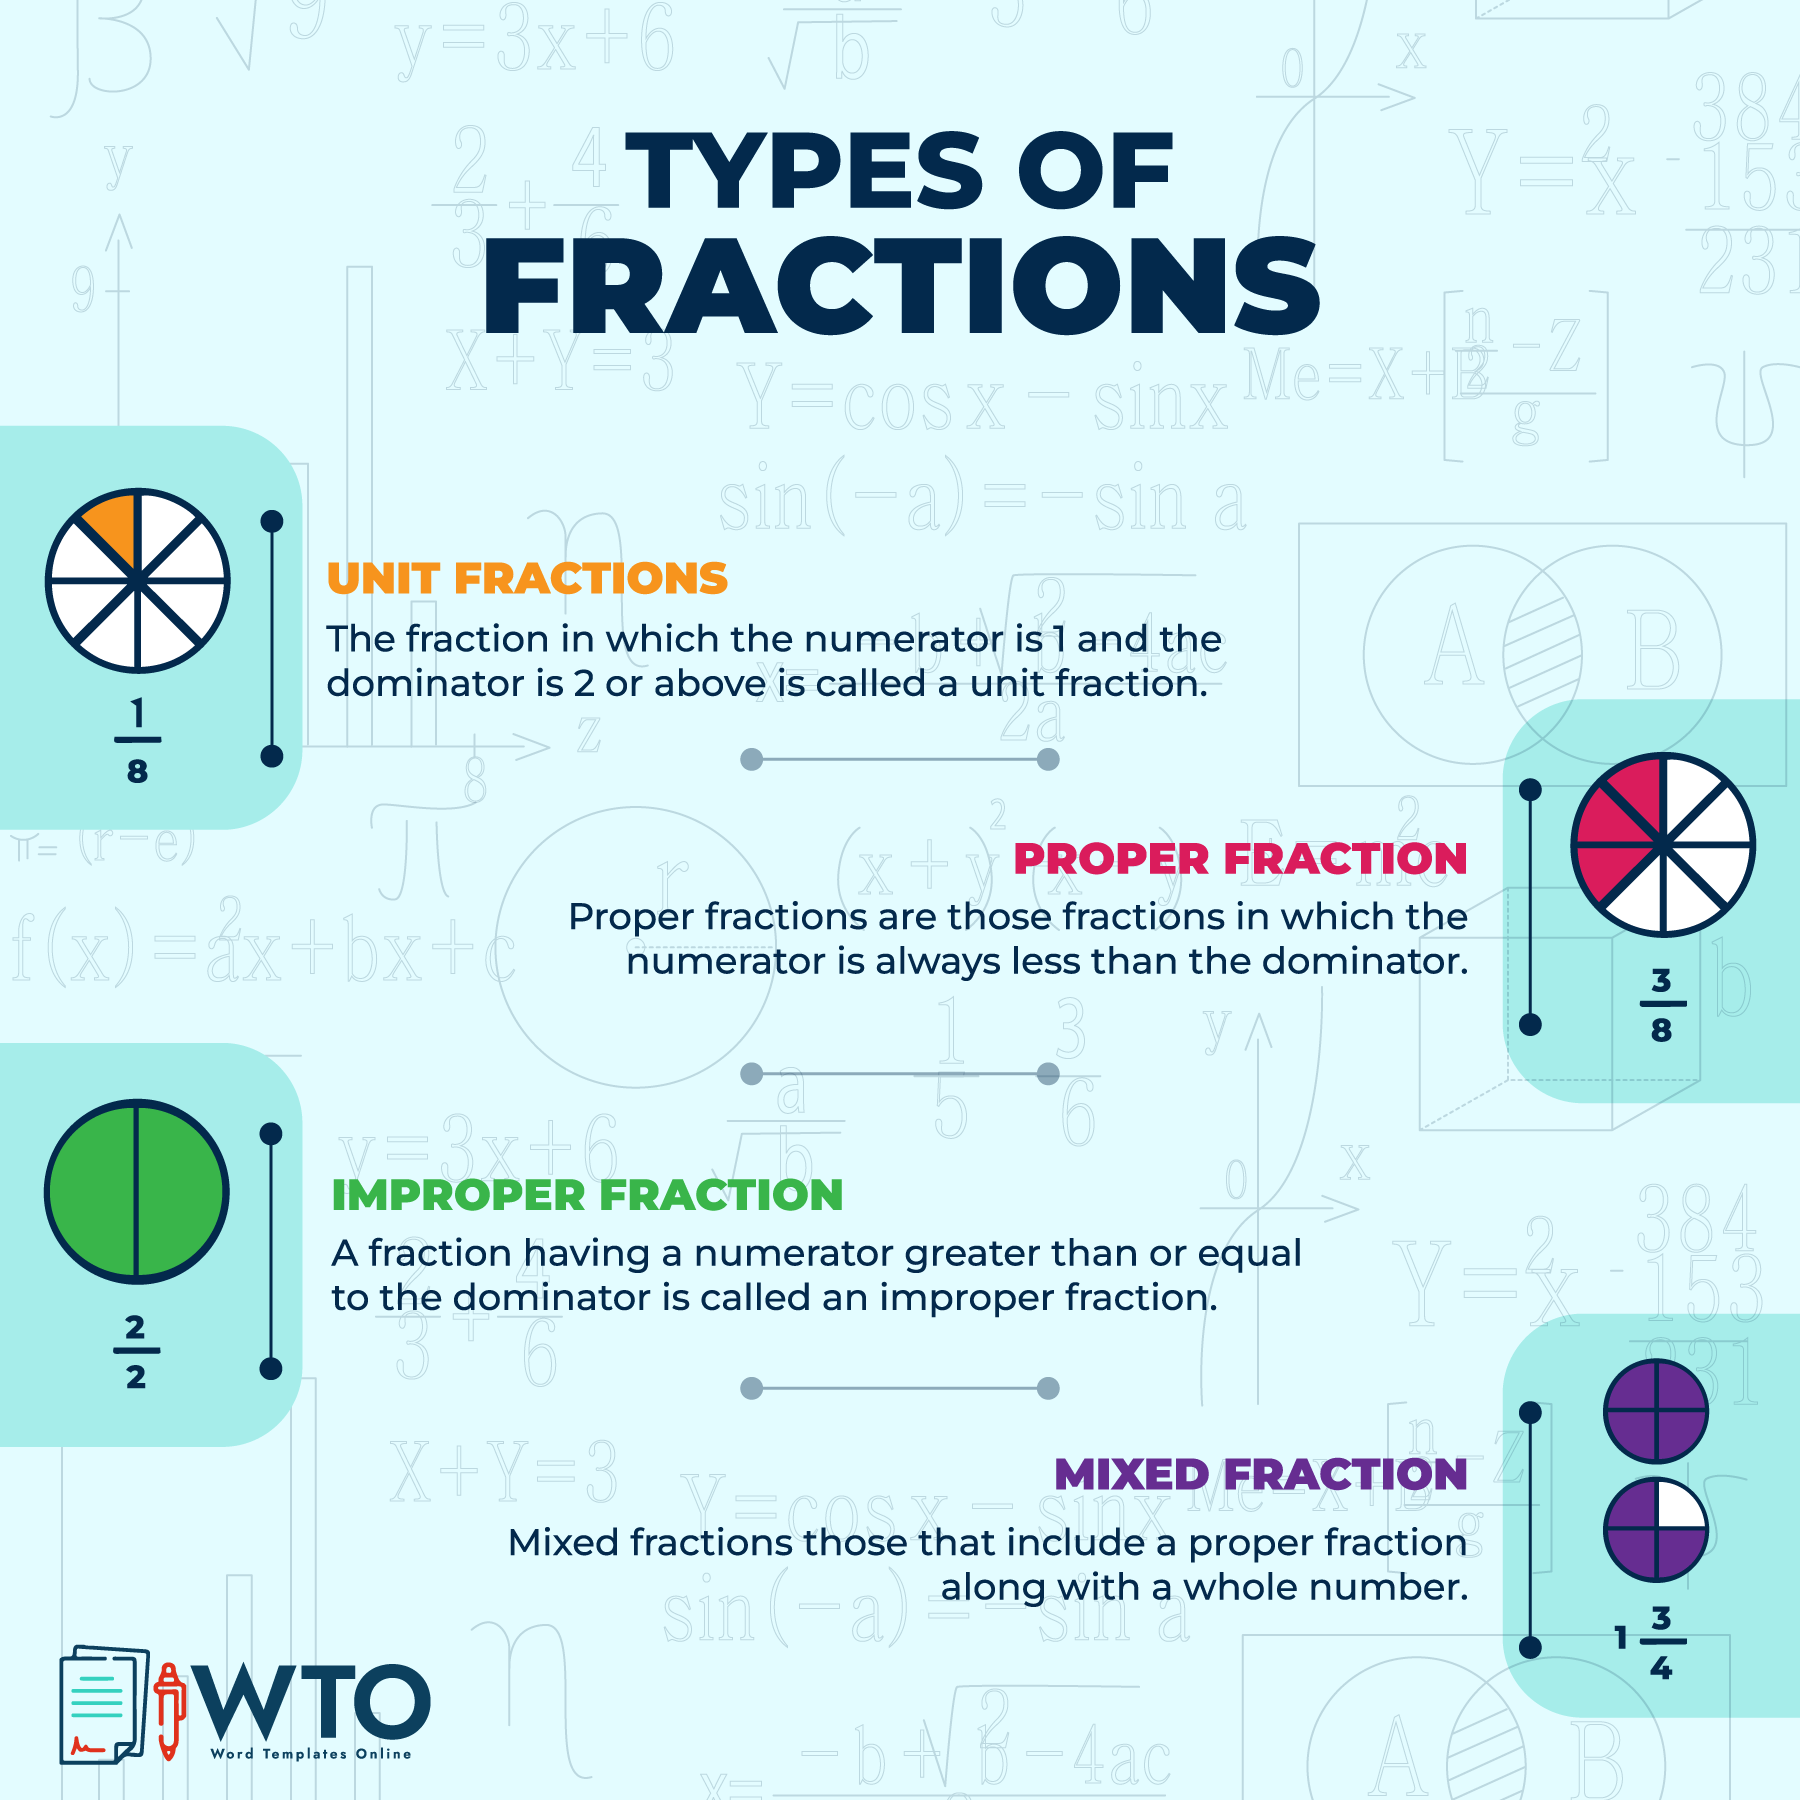 This infographic is about the Types of Fractions.